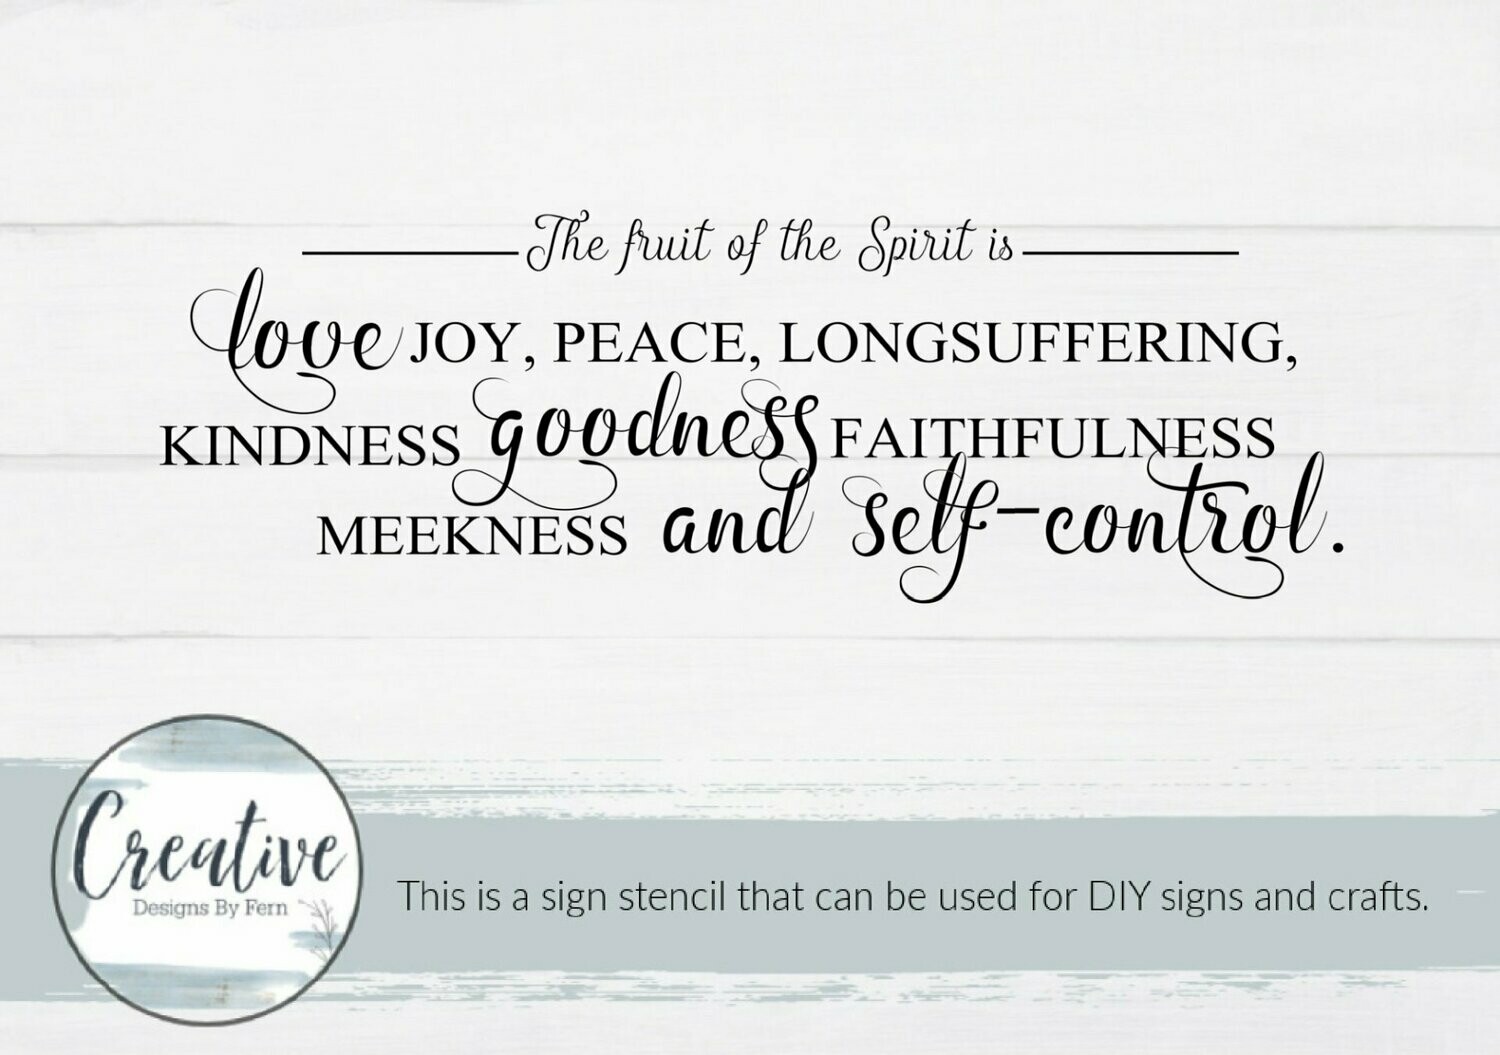 Fruit Of The Spirit Sign Stencil, Stencil or Decal: Sign Stencil, Size: 7" x 21"